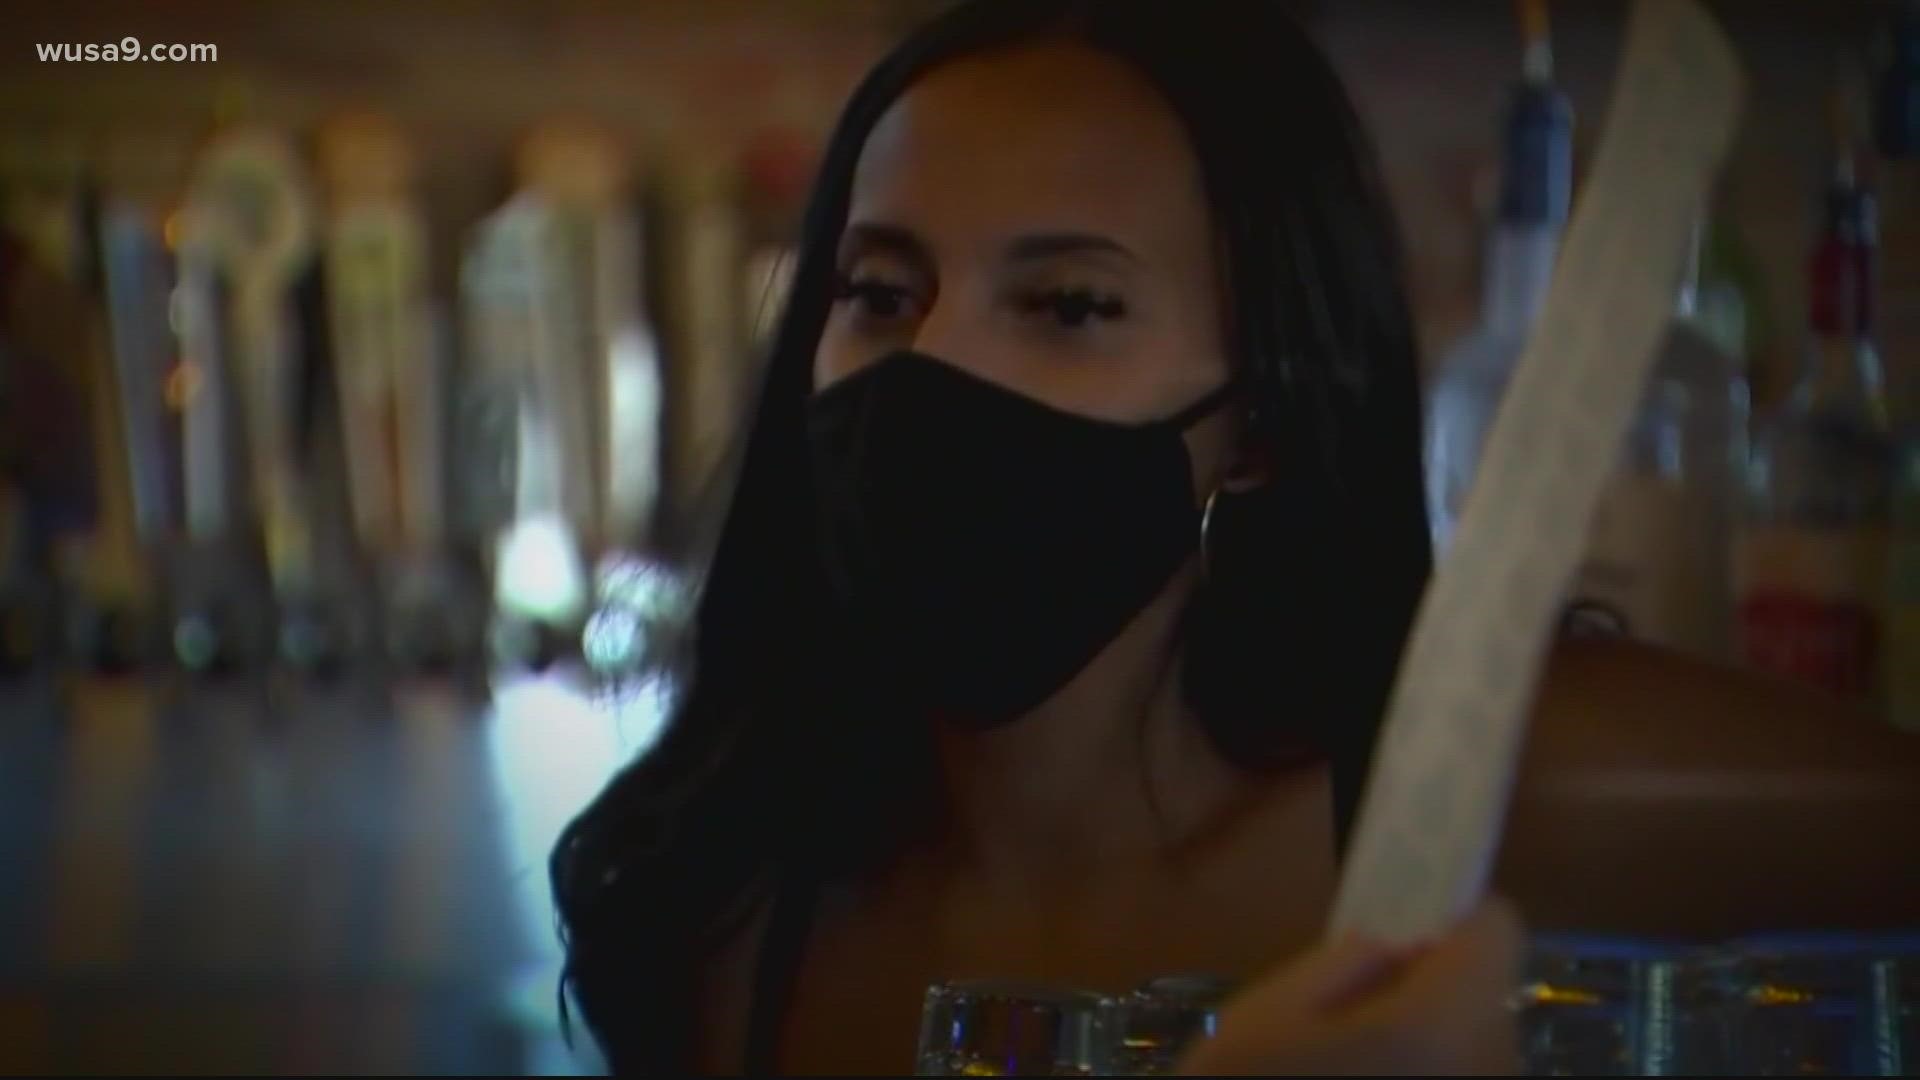 The announcement comes the same day that D.C. residents learned their own indoor mask mandate, which had been in place since late July, would soon be removed.